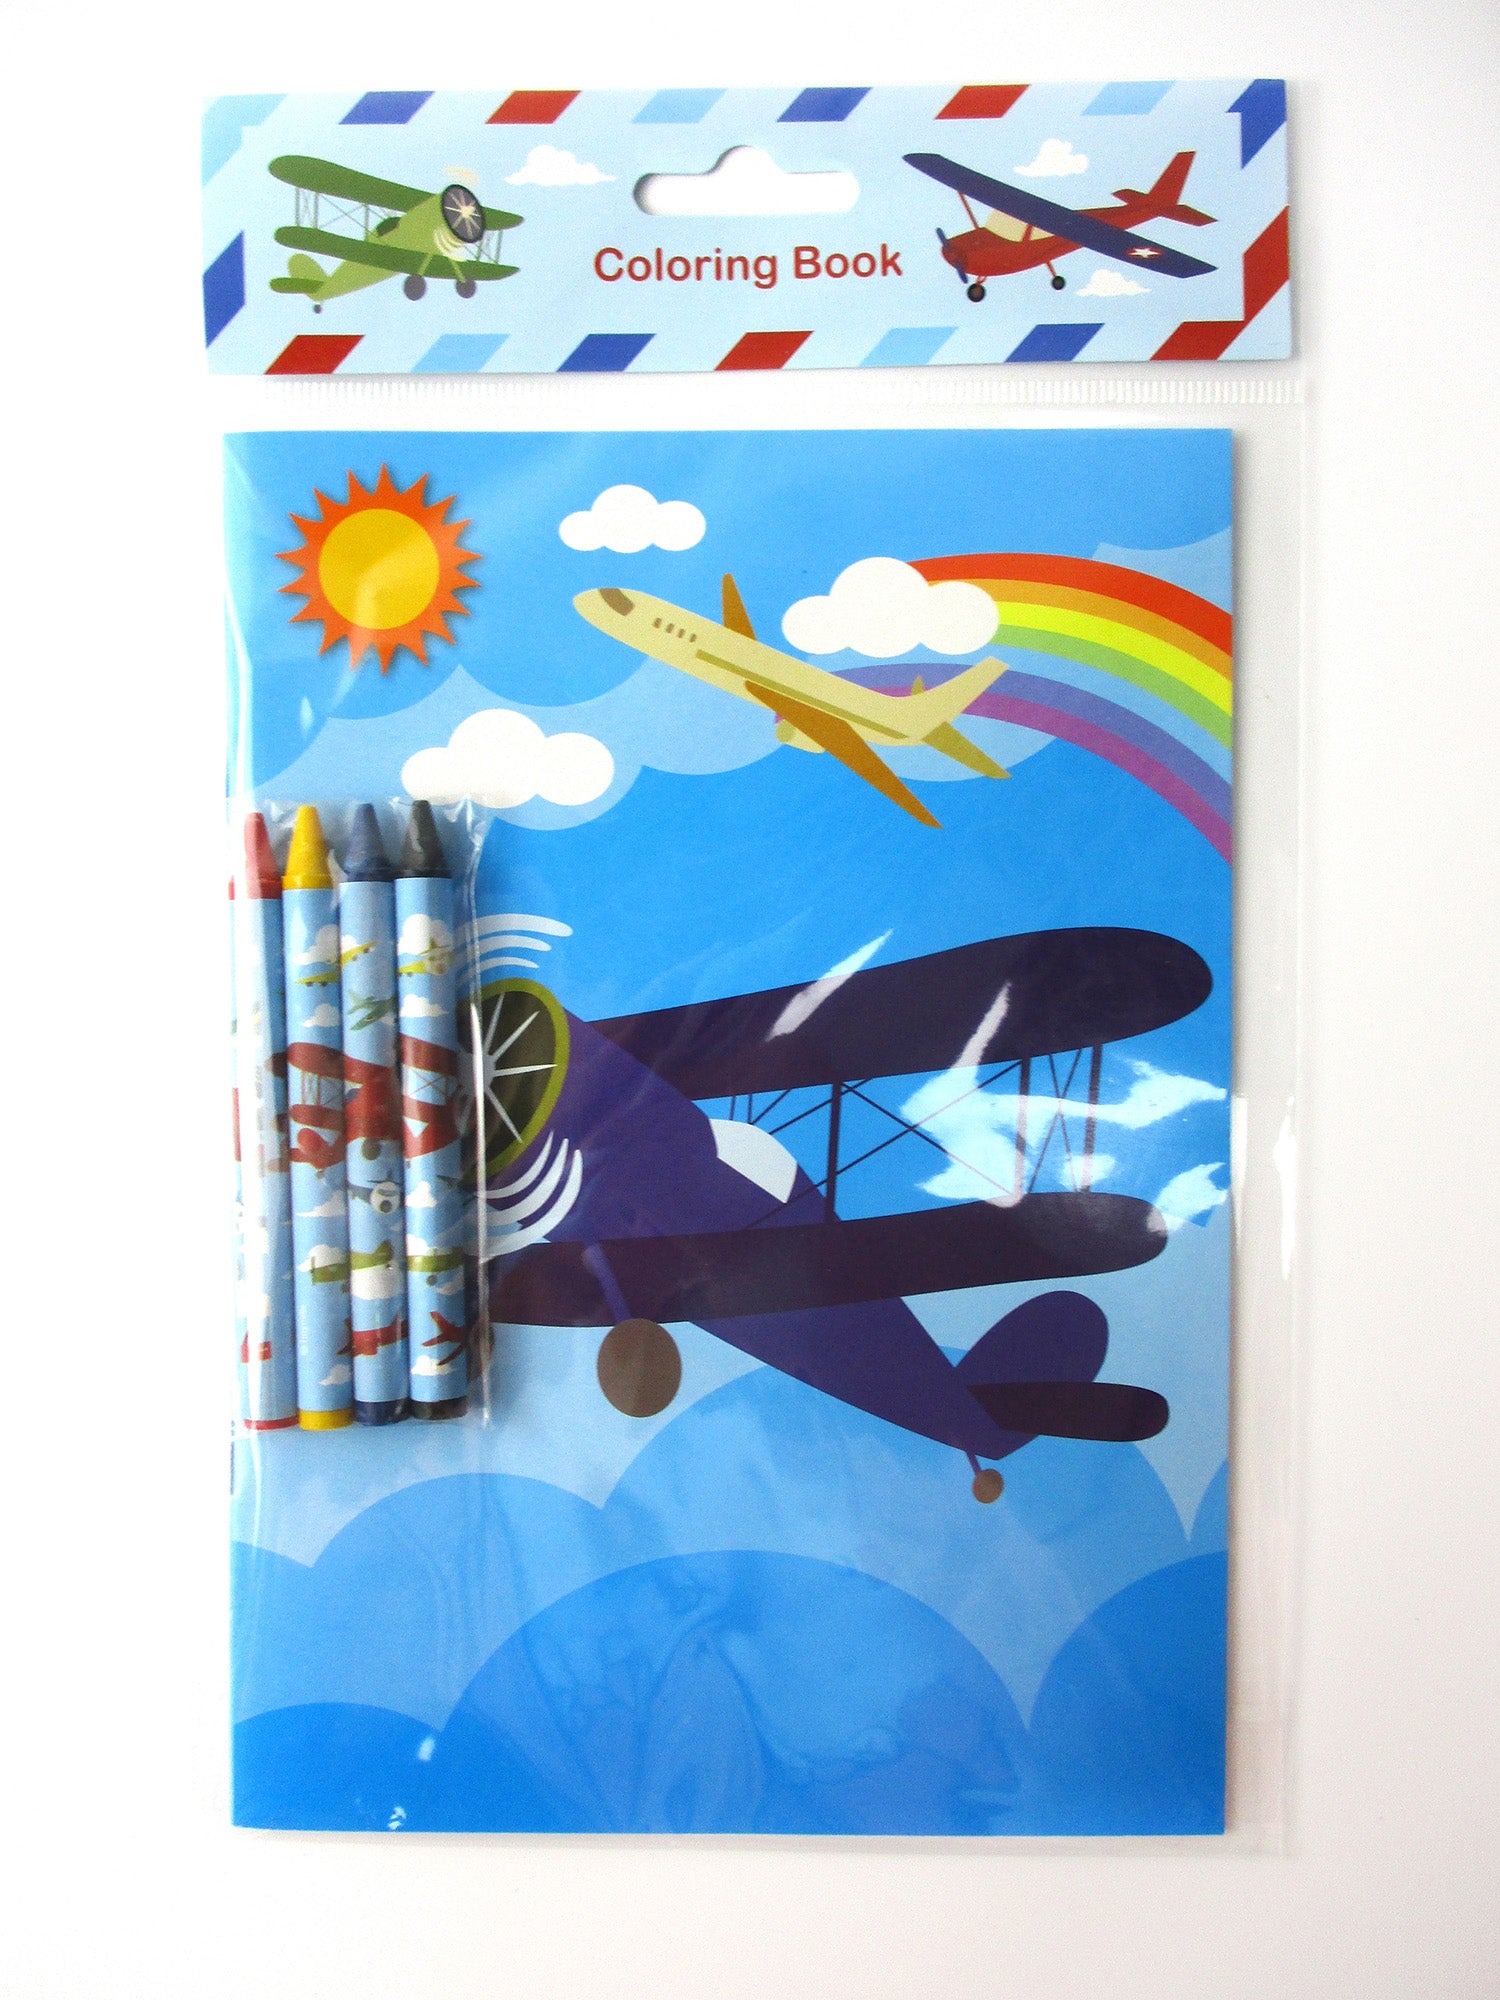 Airplane coloring book Fun Airplane Activities for Kids all Ages Boys,Girls